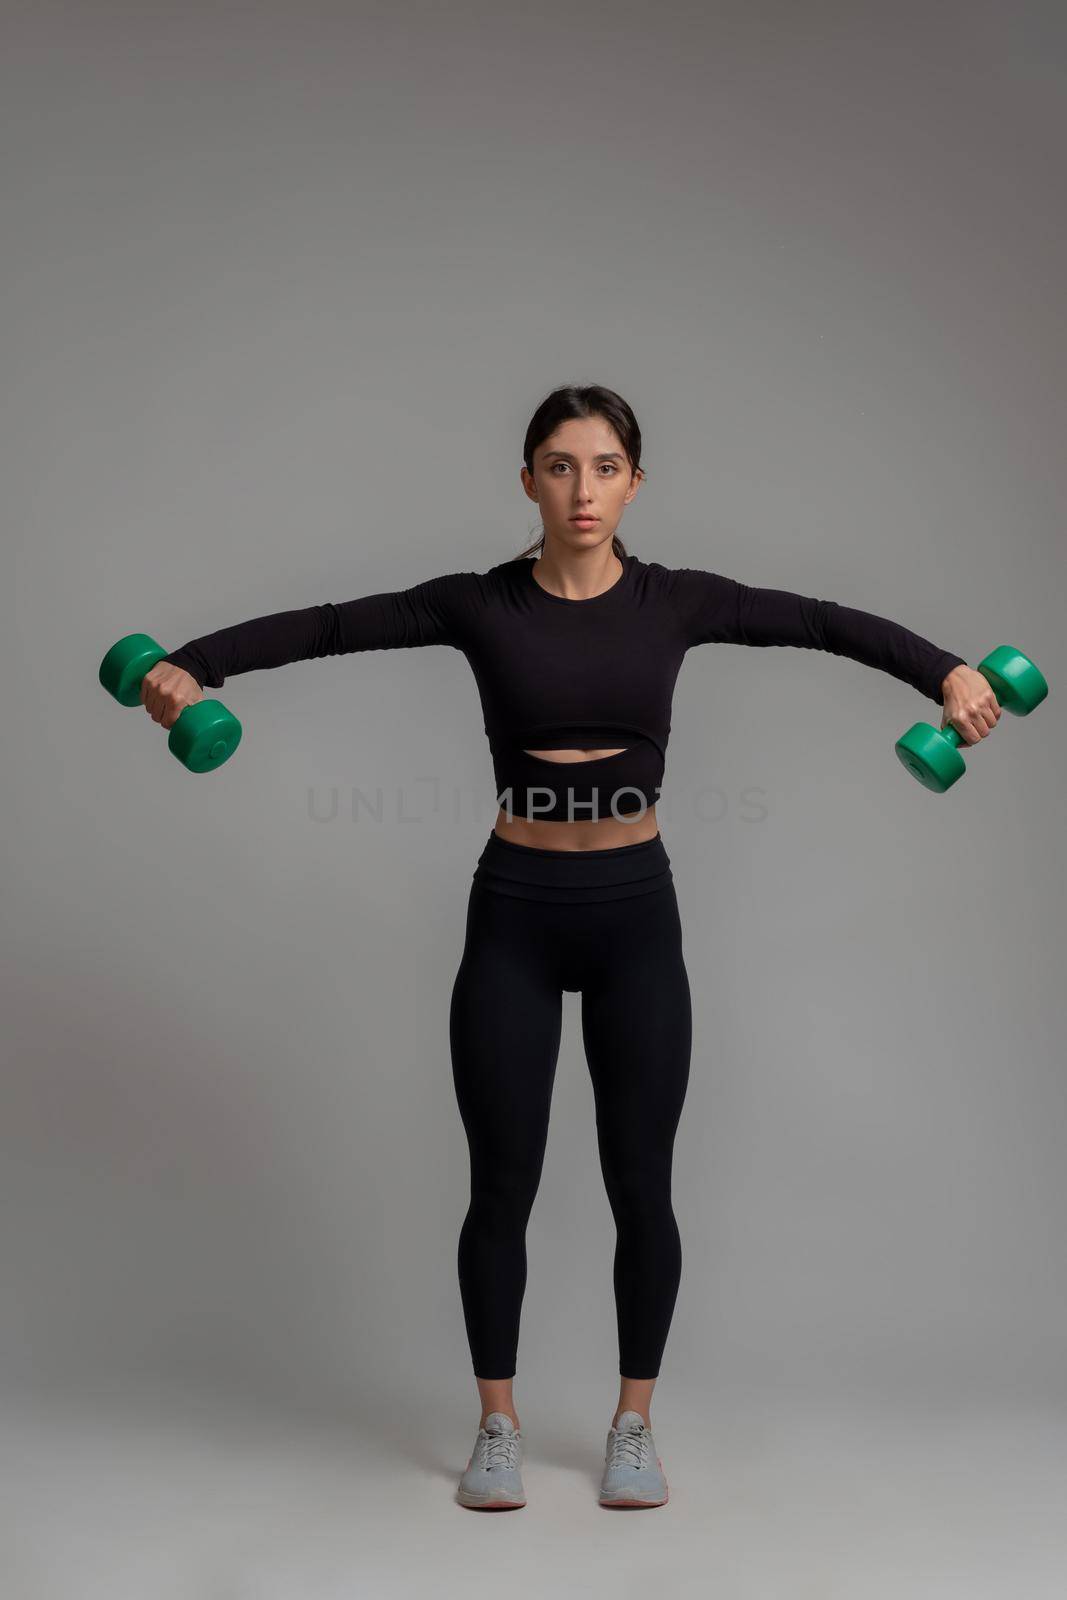 Sporty girl in black activewear working out shoulders muscles in studio on grey background, performing dumbbell lateral raise. Physical activity and fitness concept